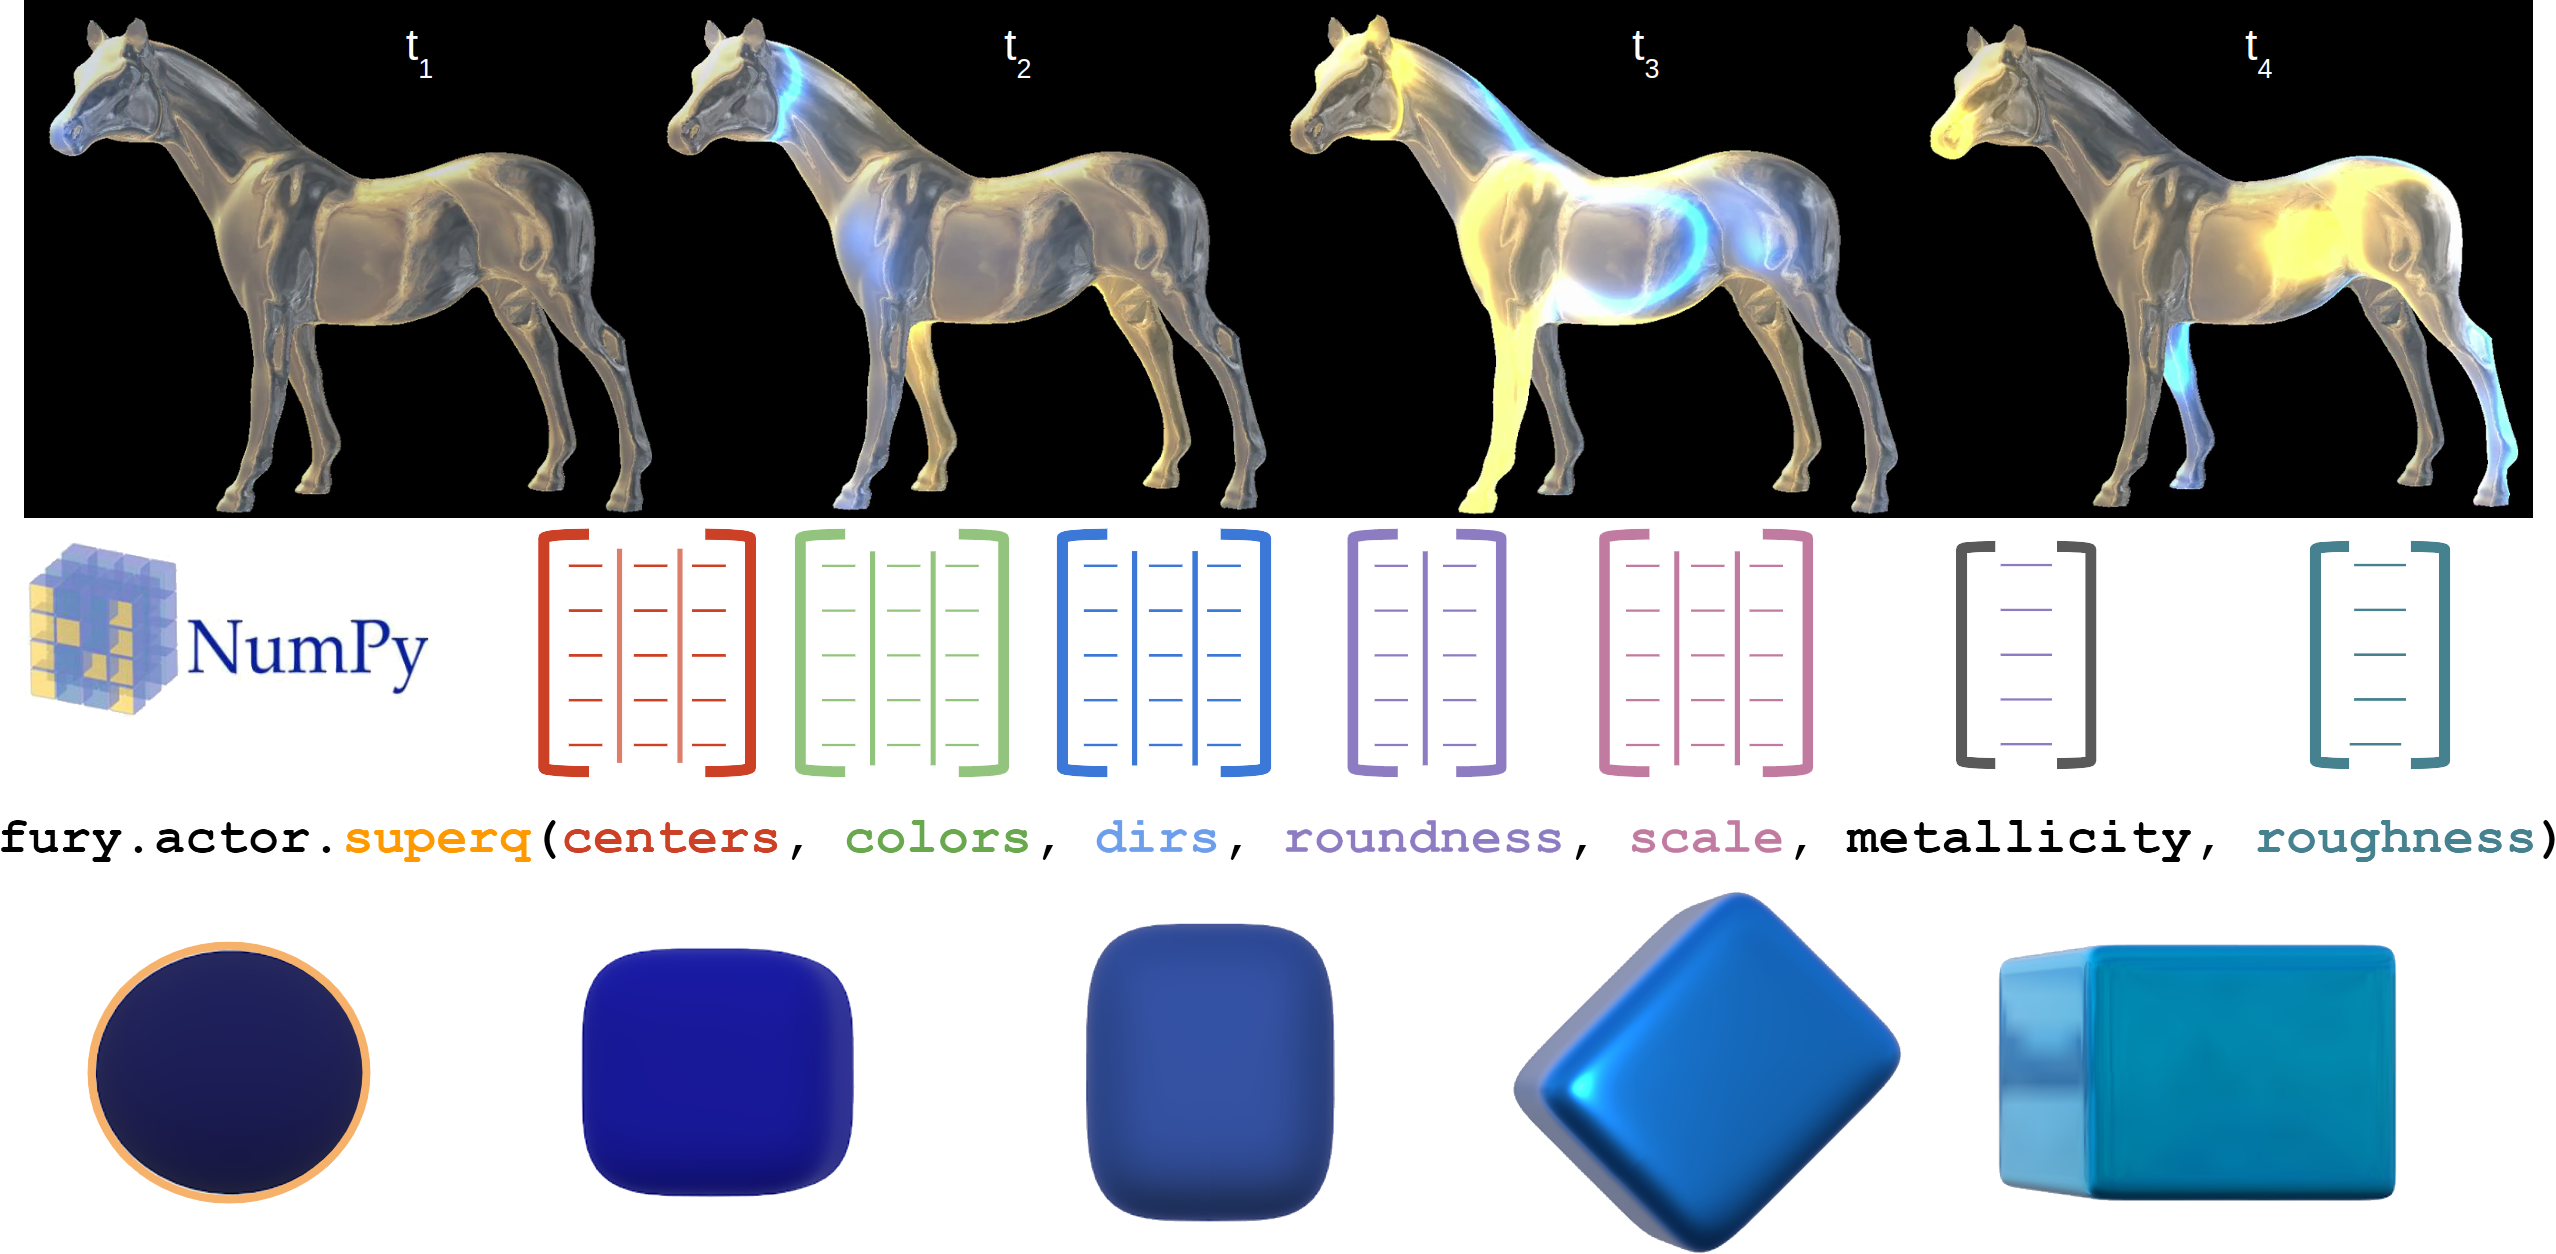 Top. Dynamic changes are shown as diffused waves on the surface of the horse visualized with FURY. Showing here 4 frames at 4 different time points (t1−t4). A vertex and fragment shader are used to calculate in real-time the mirroring texture and blend its colors with the blue-yellow wave. Bottom. In FURY we create actors that contain multiple visual objects controlled by NumPy arrays.  Here an actor is generating 5 superquadrics with different properties (e.g. colors, directions, metallicity) by injecting the information as NumPy arrays in a single call.  This is one of the important design choices that make FURY easier to use but also faster to render. Actors in FURY can contain many objects. The user can select any of the objects in the actor. Here the user selected the first object (spherical superquadric).\label{fig:features}